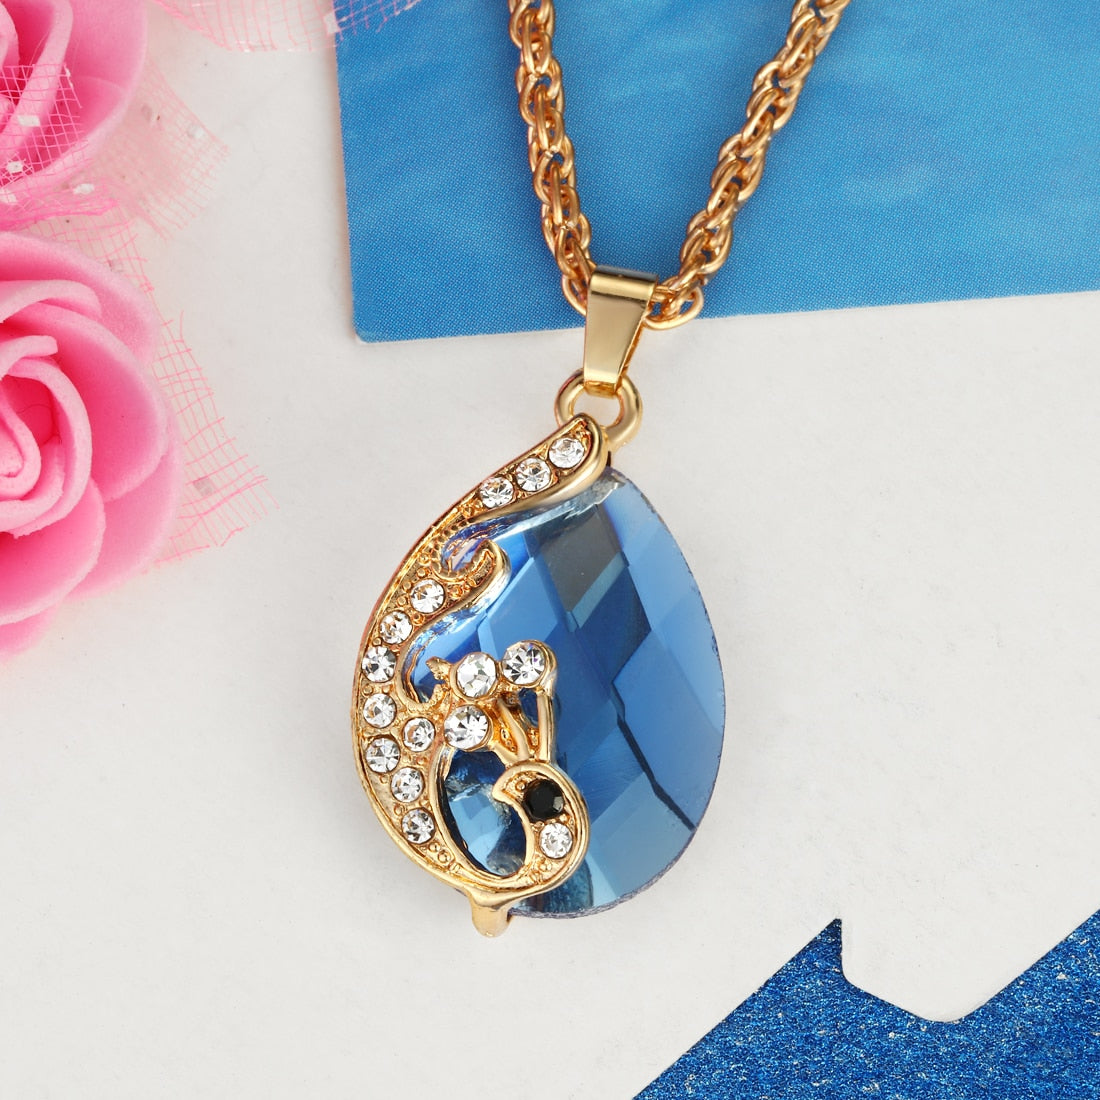 Wedding Jewelry Luxury Blue Marquise Cut Crystal Jewelry Set in Gold Color